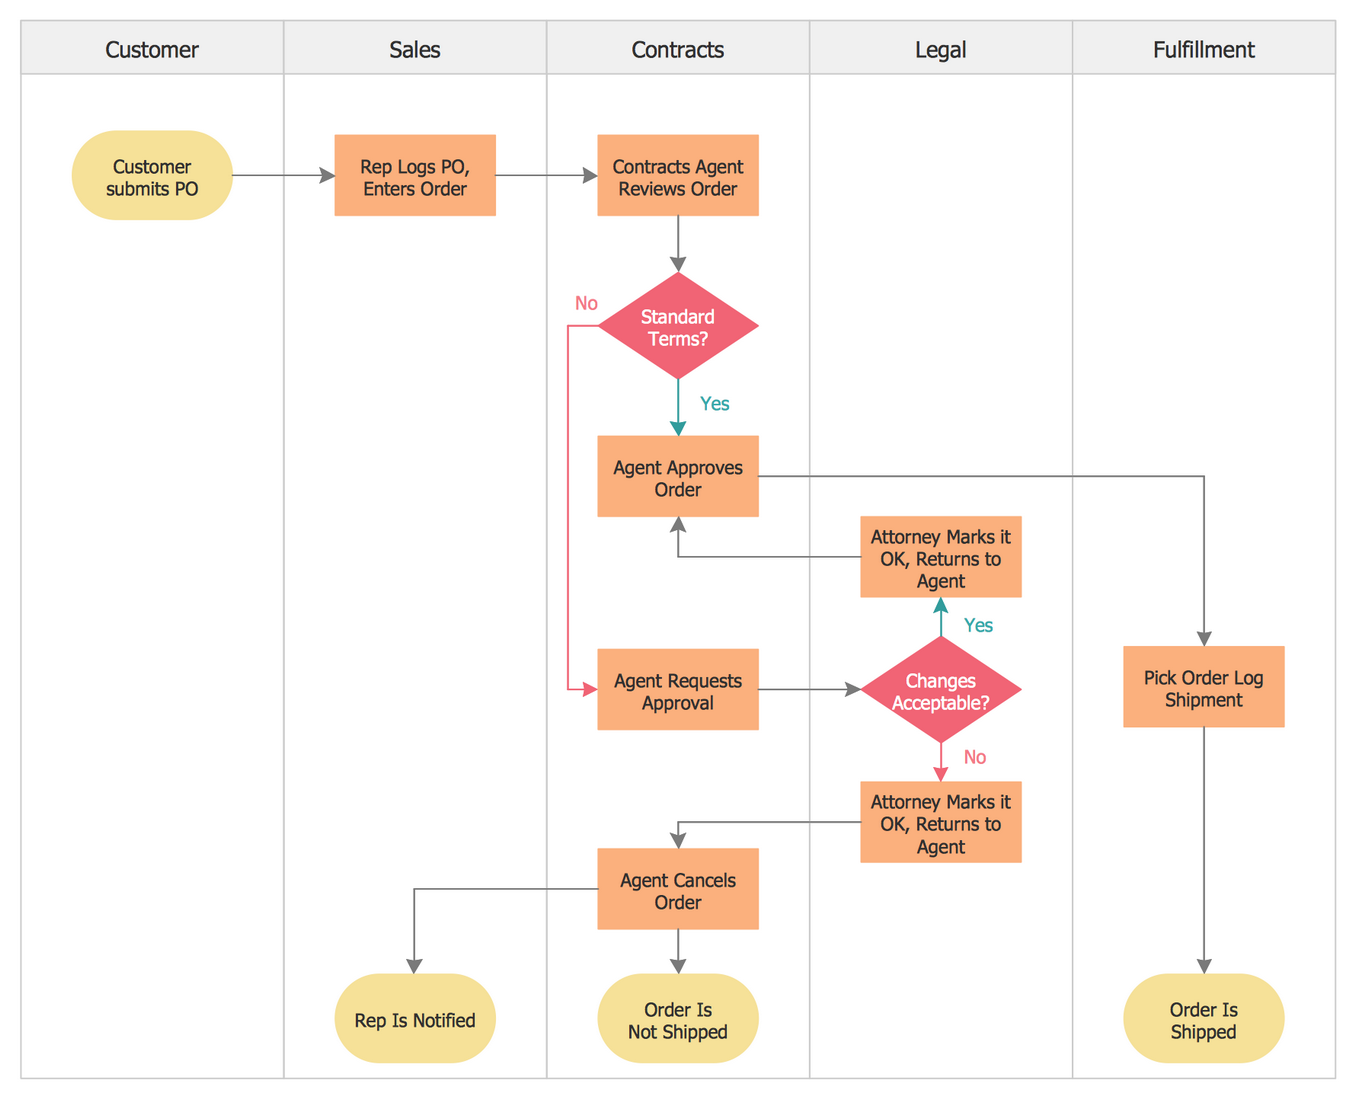 Types Of Flowcharts Types Of Flowchart Overview Examples Of Images